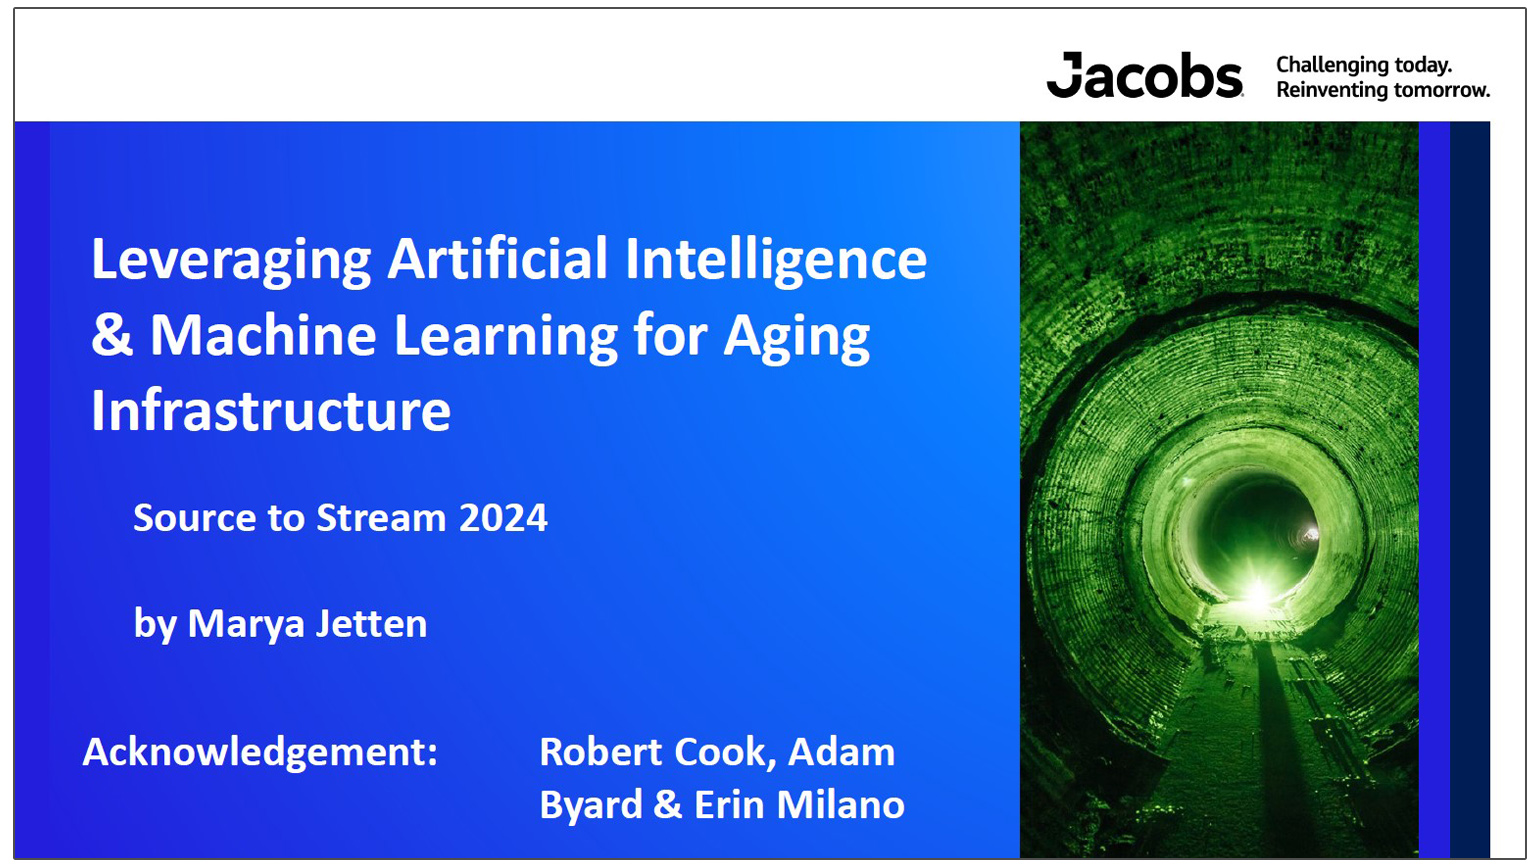 Leveraging Artificial Intelligence and Machine Learning for Aging Infrastructure - presentation by Marya Jetten